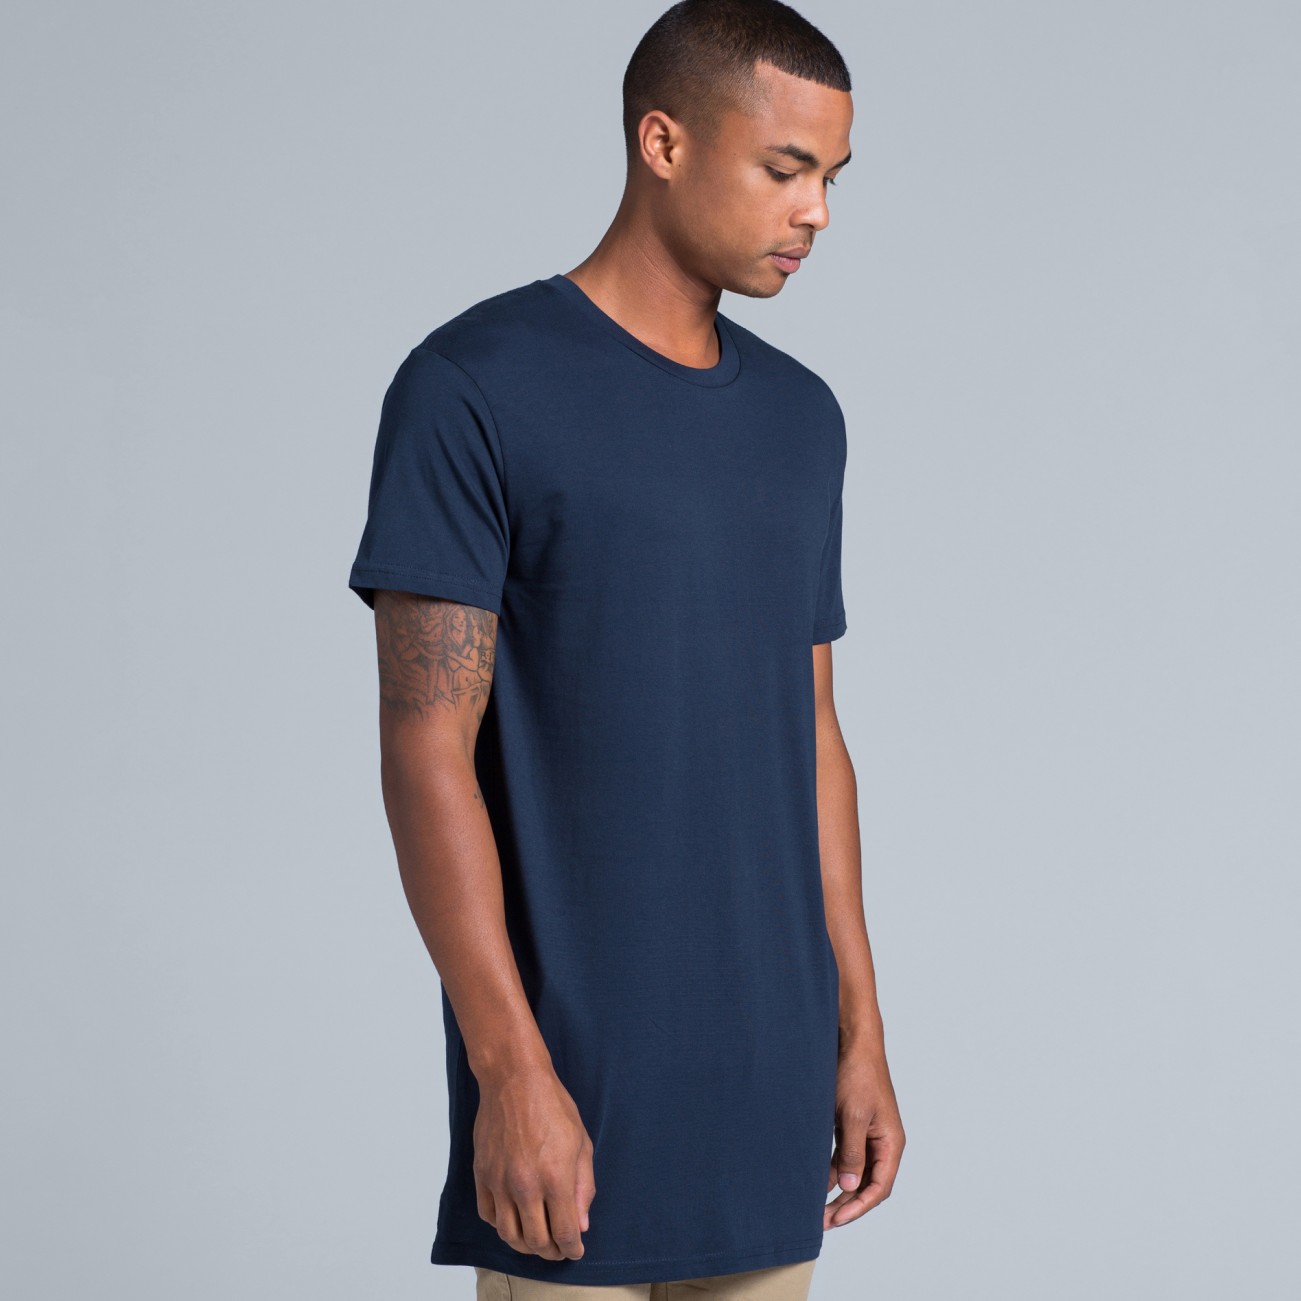 Navy AS Colour AS5013 Tall Tee longer length tee great to print or embroider